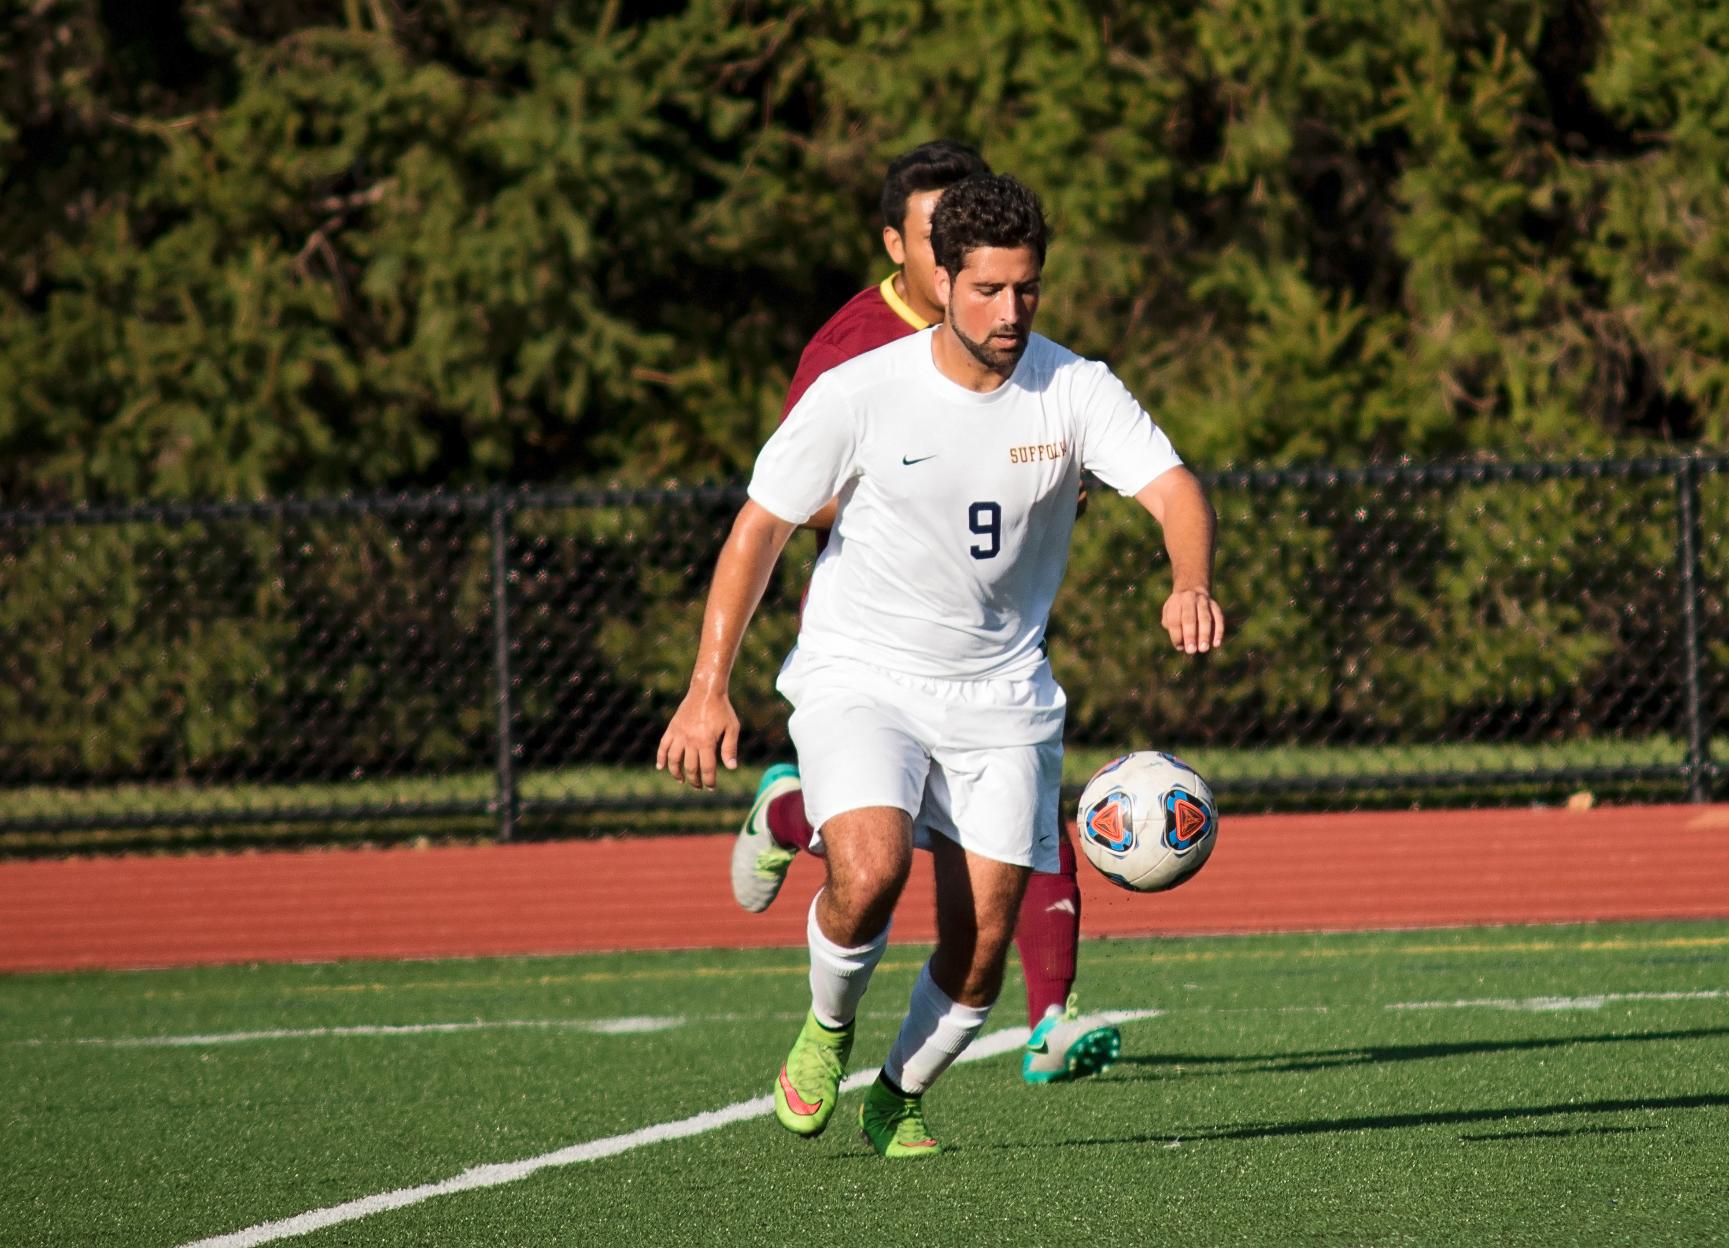 Men's Soccer Tops Anna Maria 5-1 on Saturday in GNAC Action